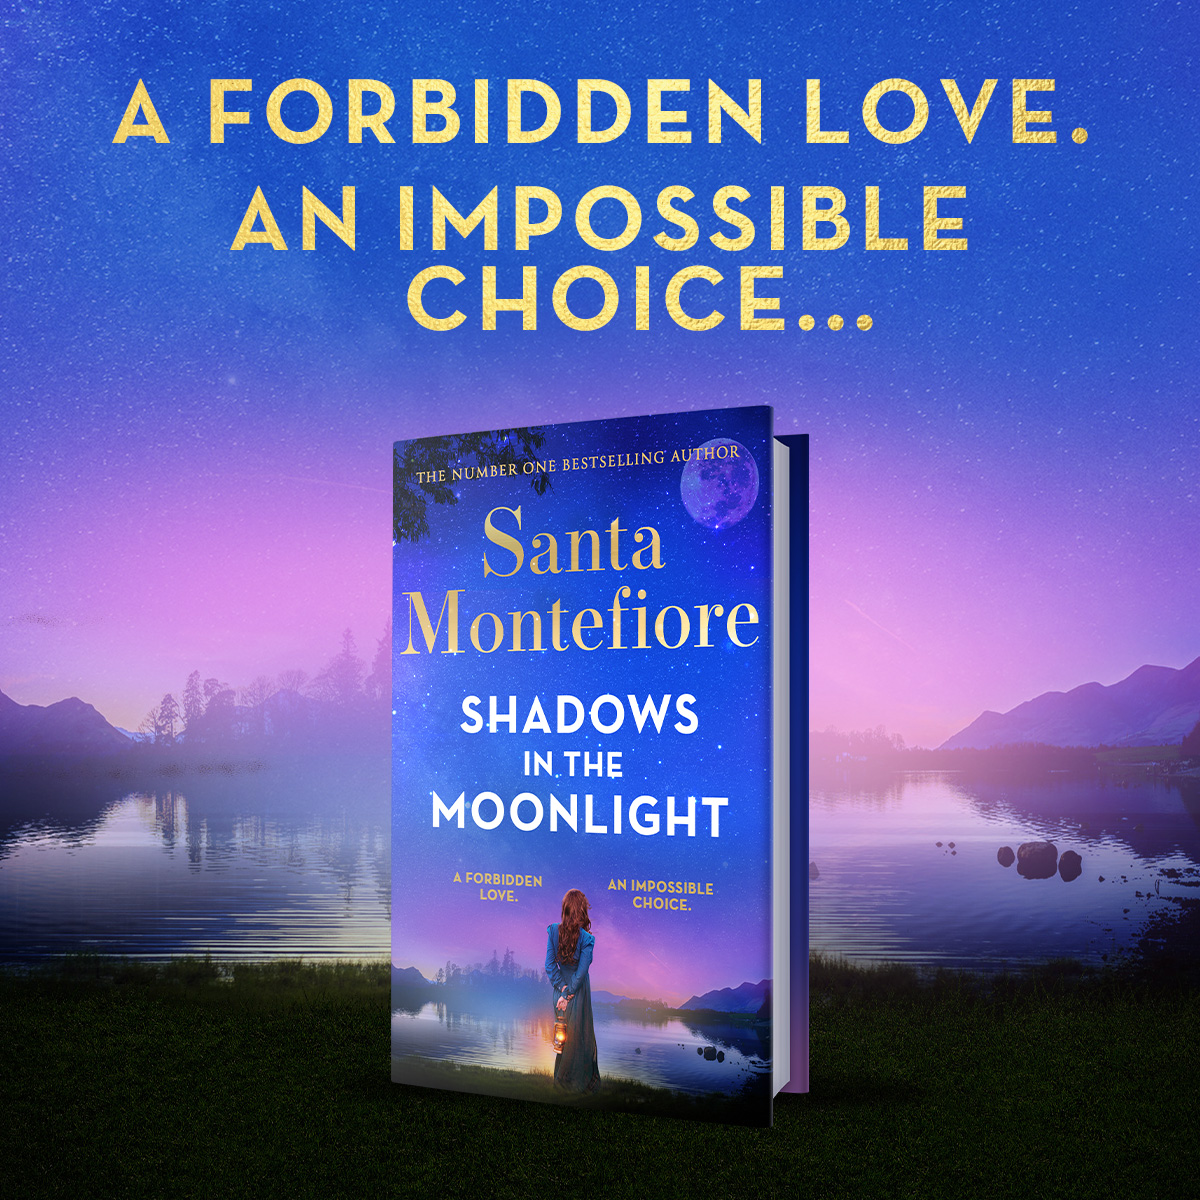 There's less than a month to go until the release of @SantaMontefiore's stunning new novel, SHADOWS IN THE MOONLIGHT. If you like your books sweeping, romantic, and with a touch of mystery, you will love this book. Pre-order your copy here: brnw.ch/21wK4DQ